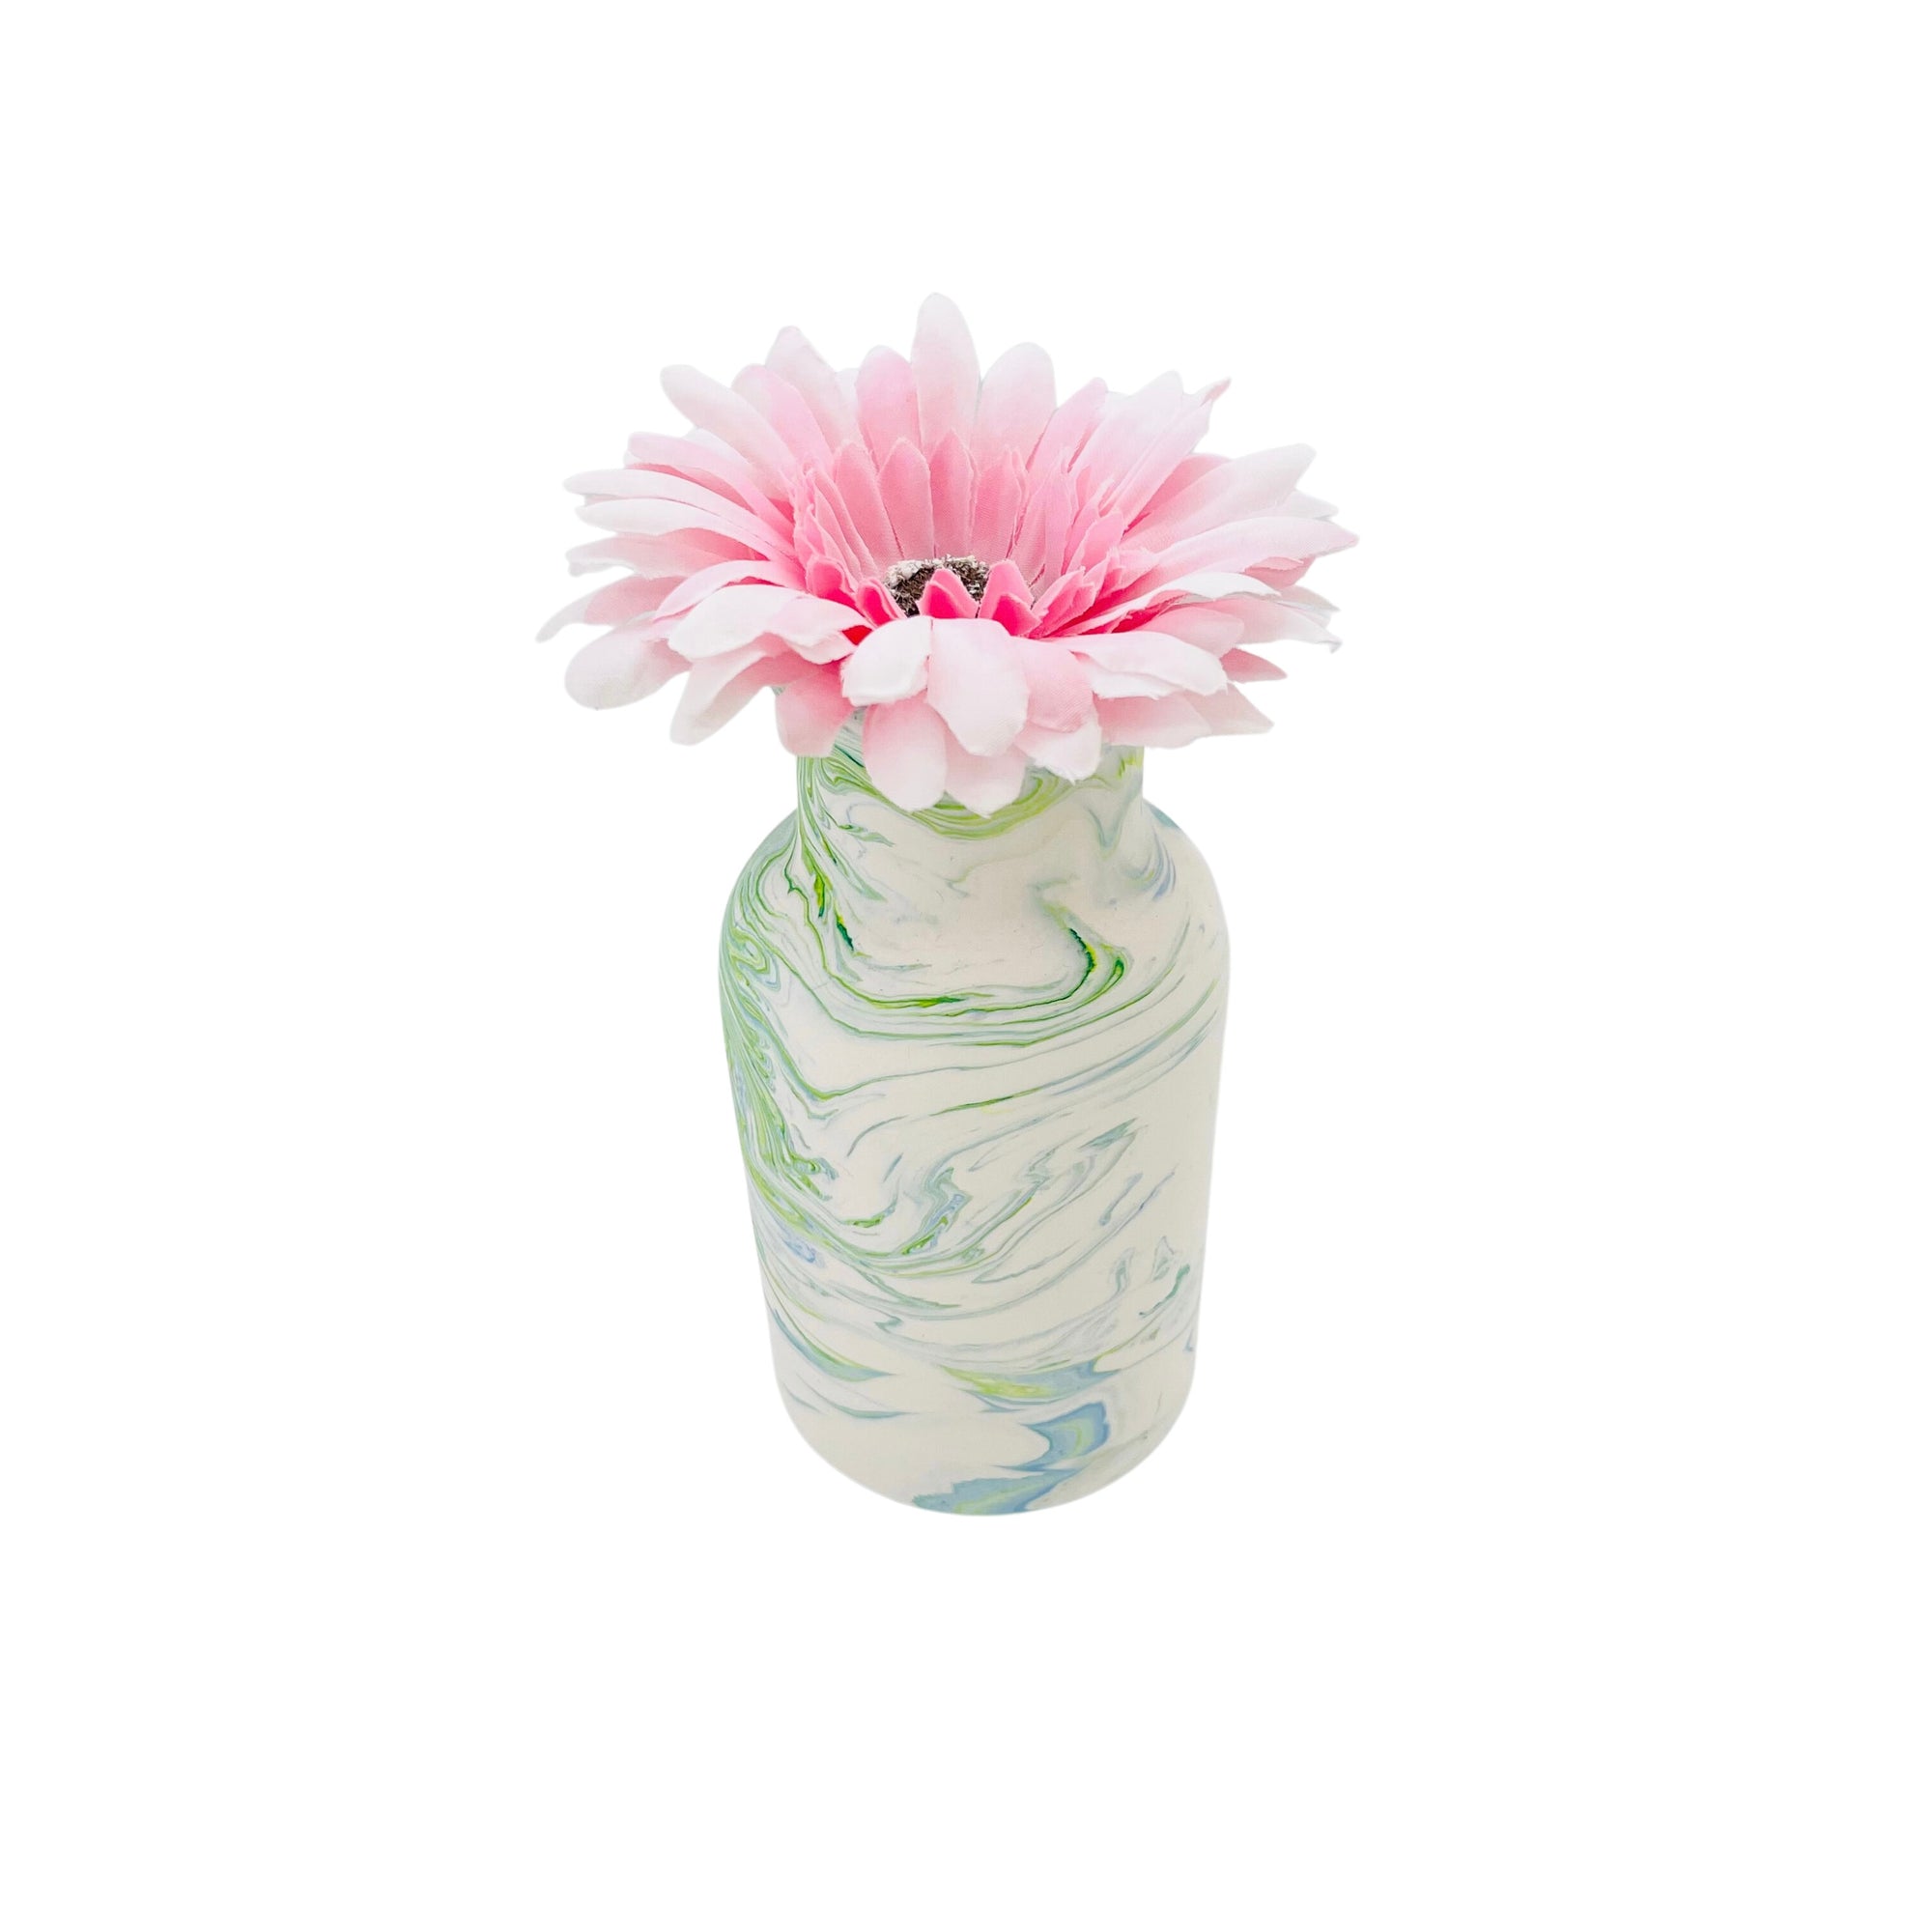 A Jesmonite eco-friendly bottle vase with a neck diameter of 6.50cm marbled with baby blue and green pigment.